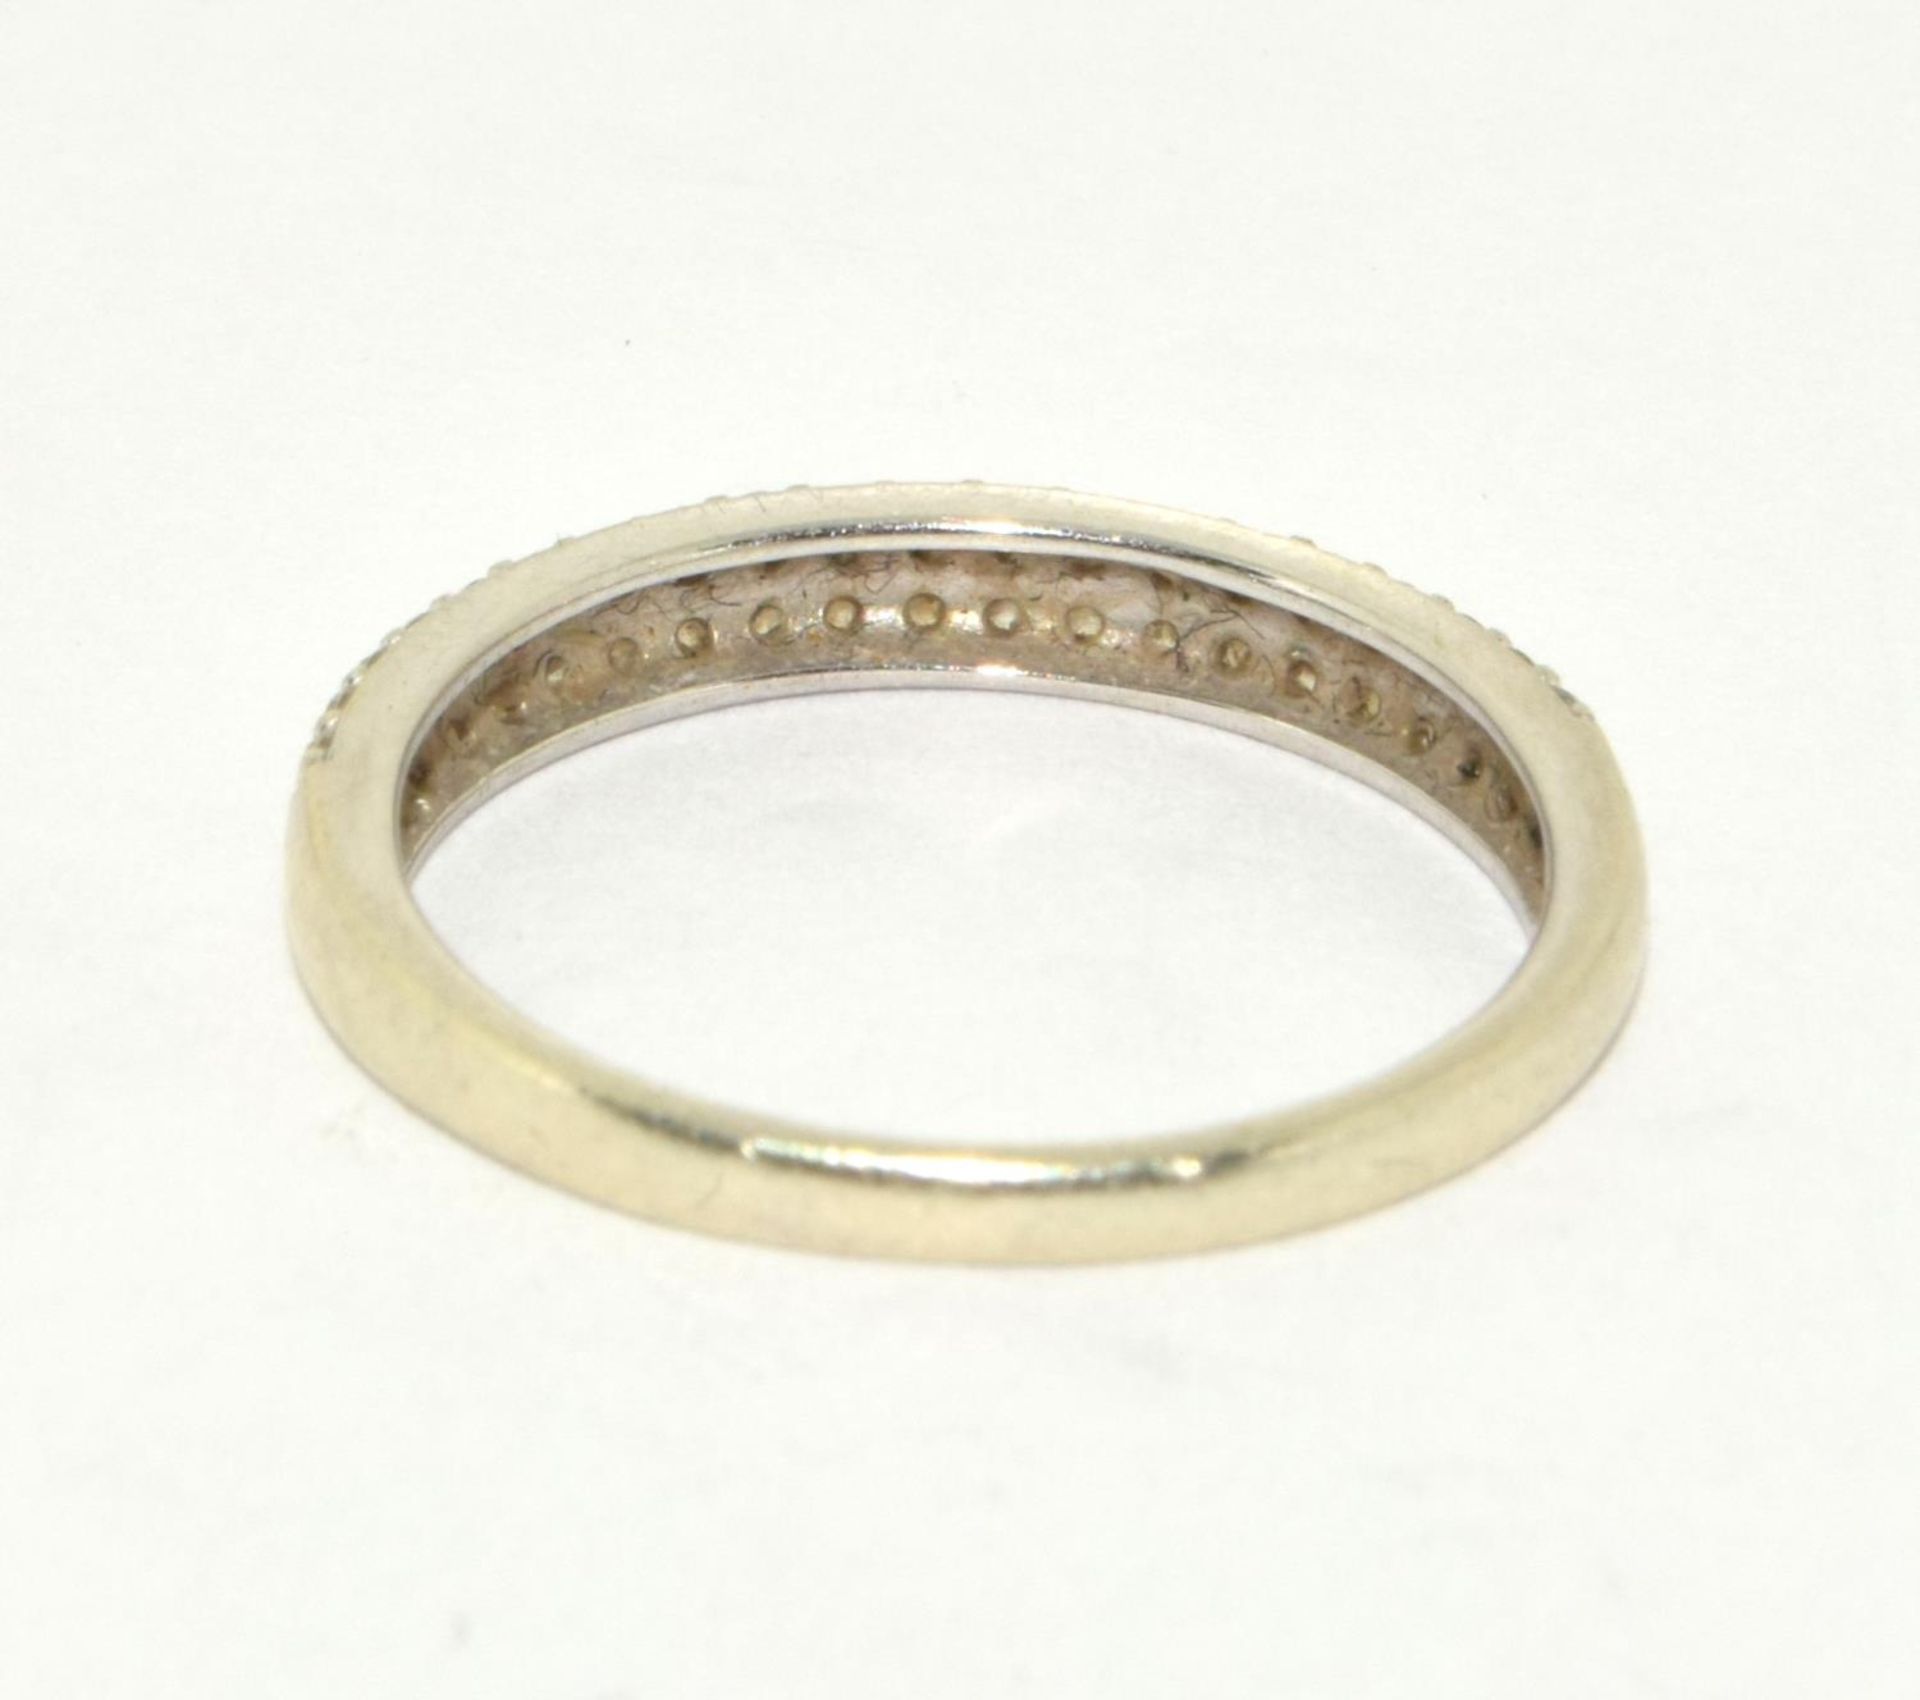 9ct white gold twin band 1/2 eternity ring size P - Image 3 of 5